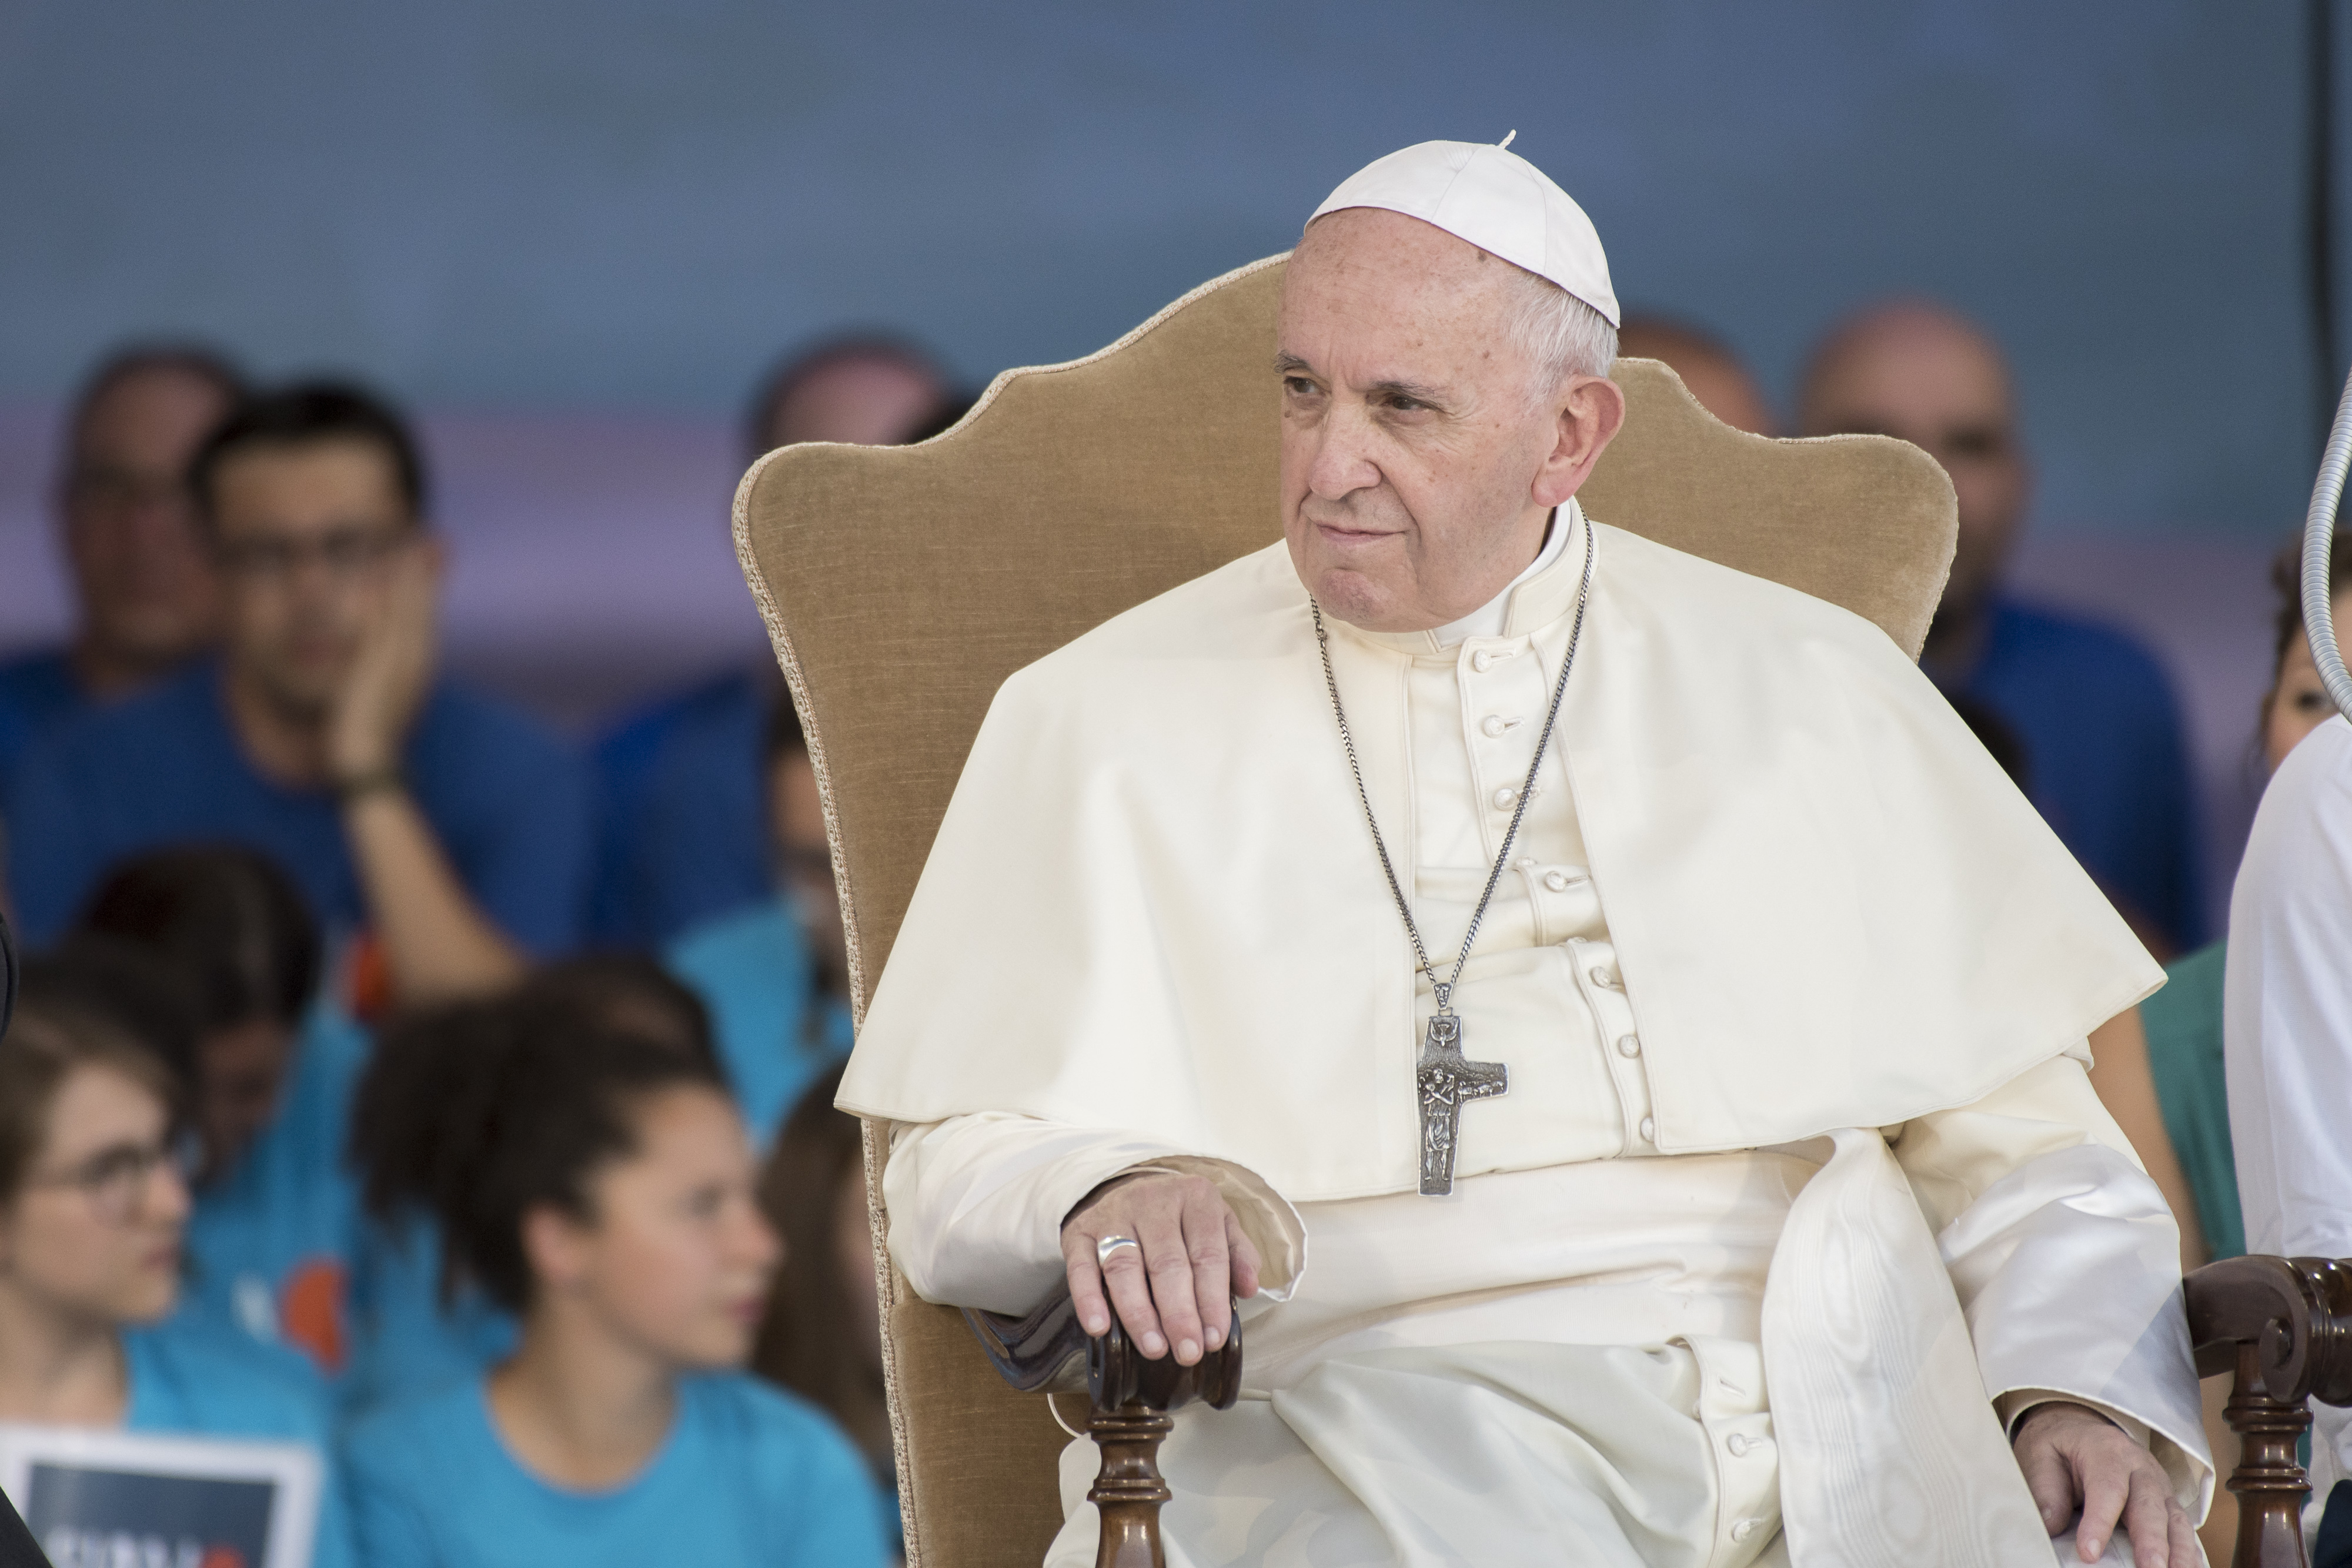 Vatican confirms pope will meet abuse survivors in Ireland